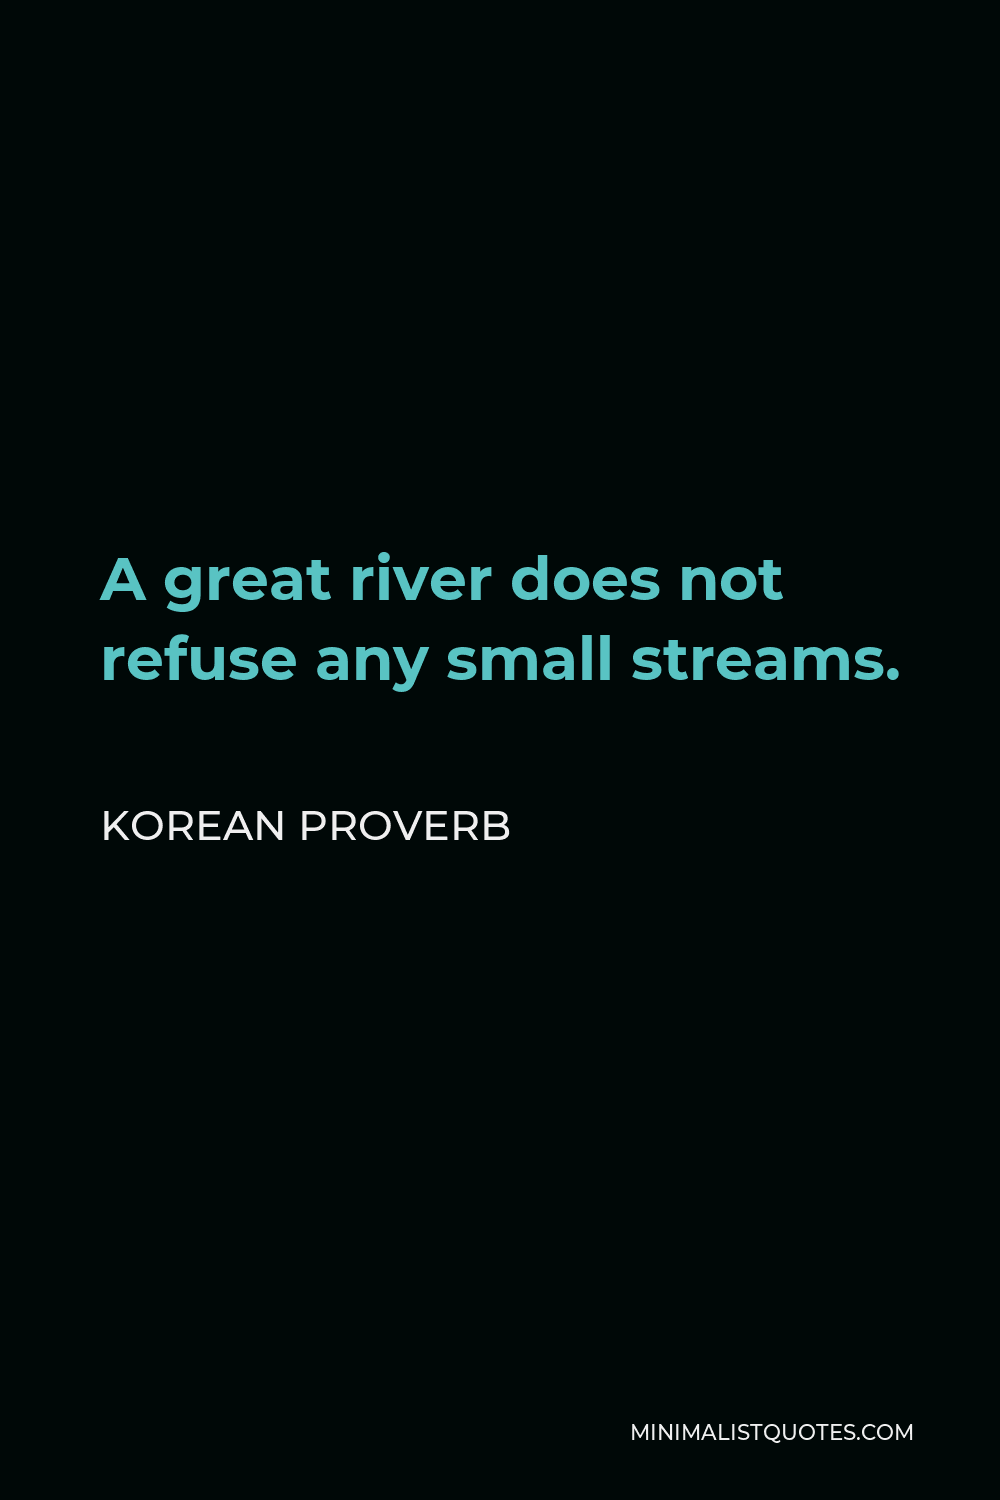 Korean Proverb Quote - A great river does not refuse any small streams.